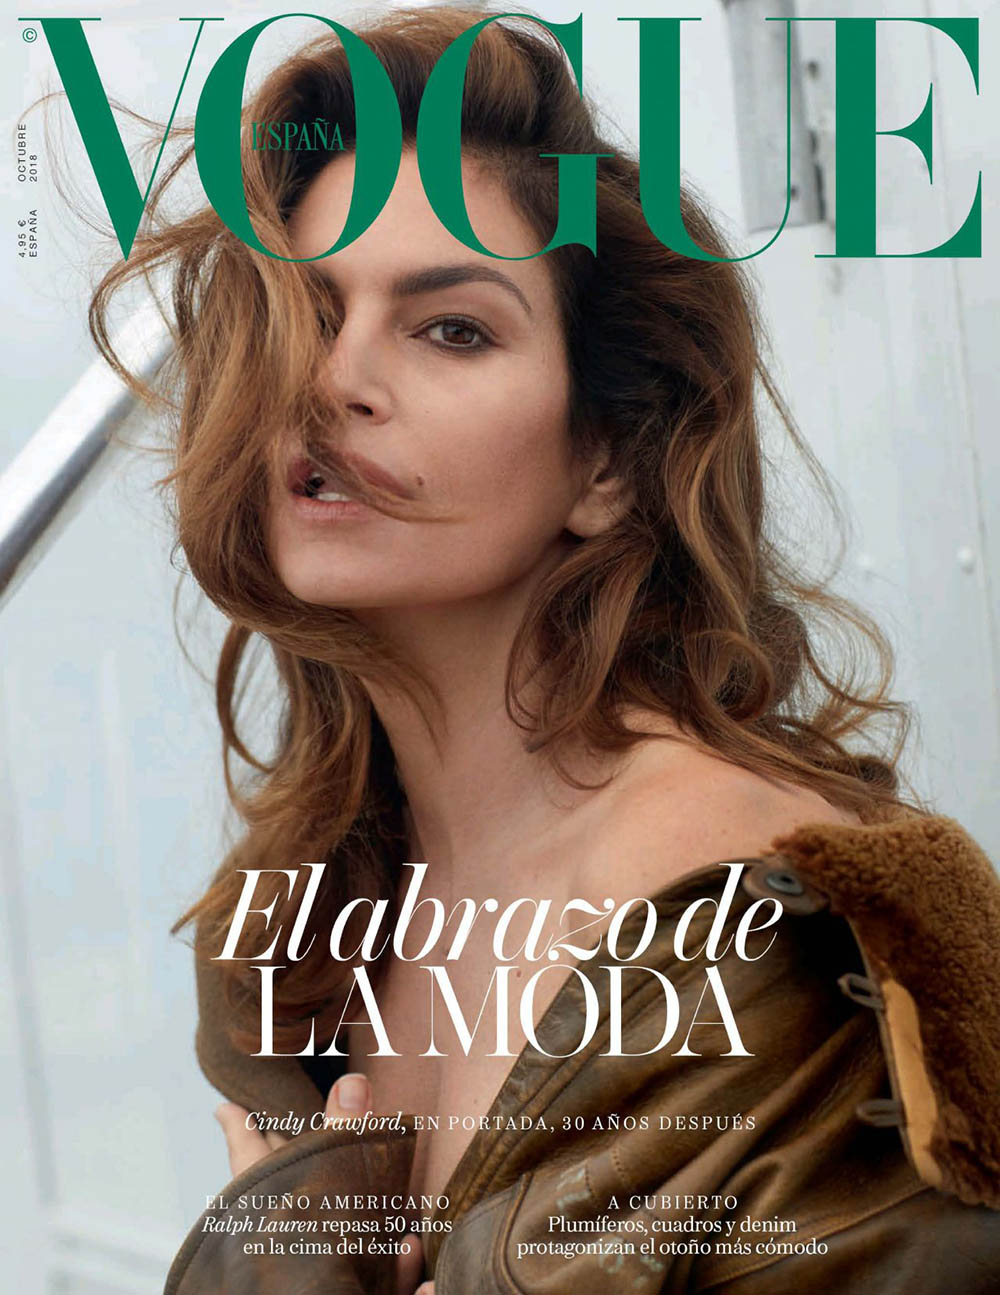 Cindy Crawford covers Vogue Spain October 2018 by Sebastian Faena